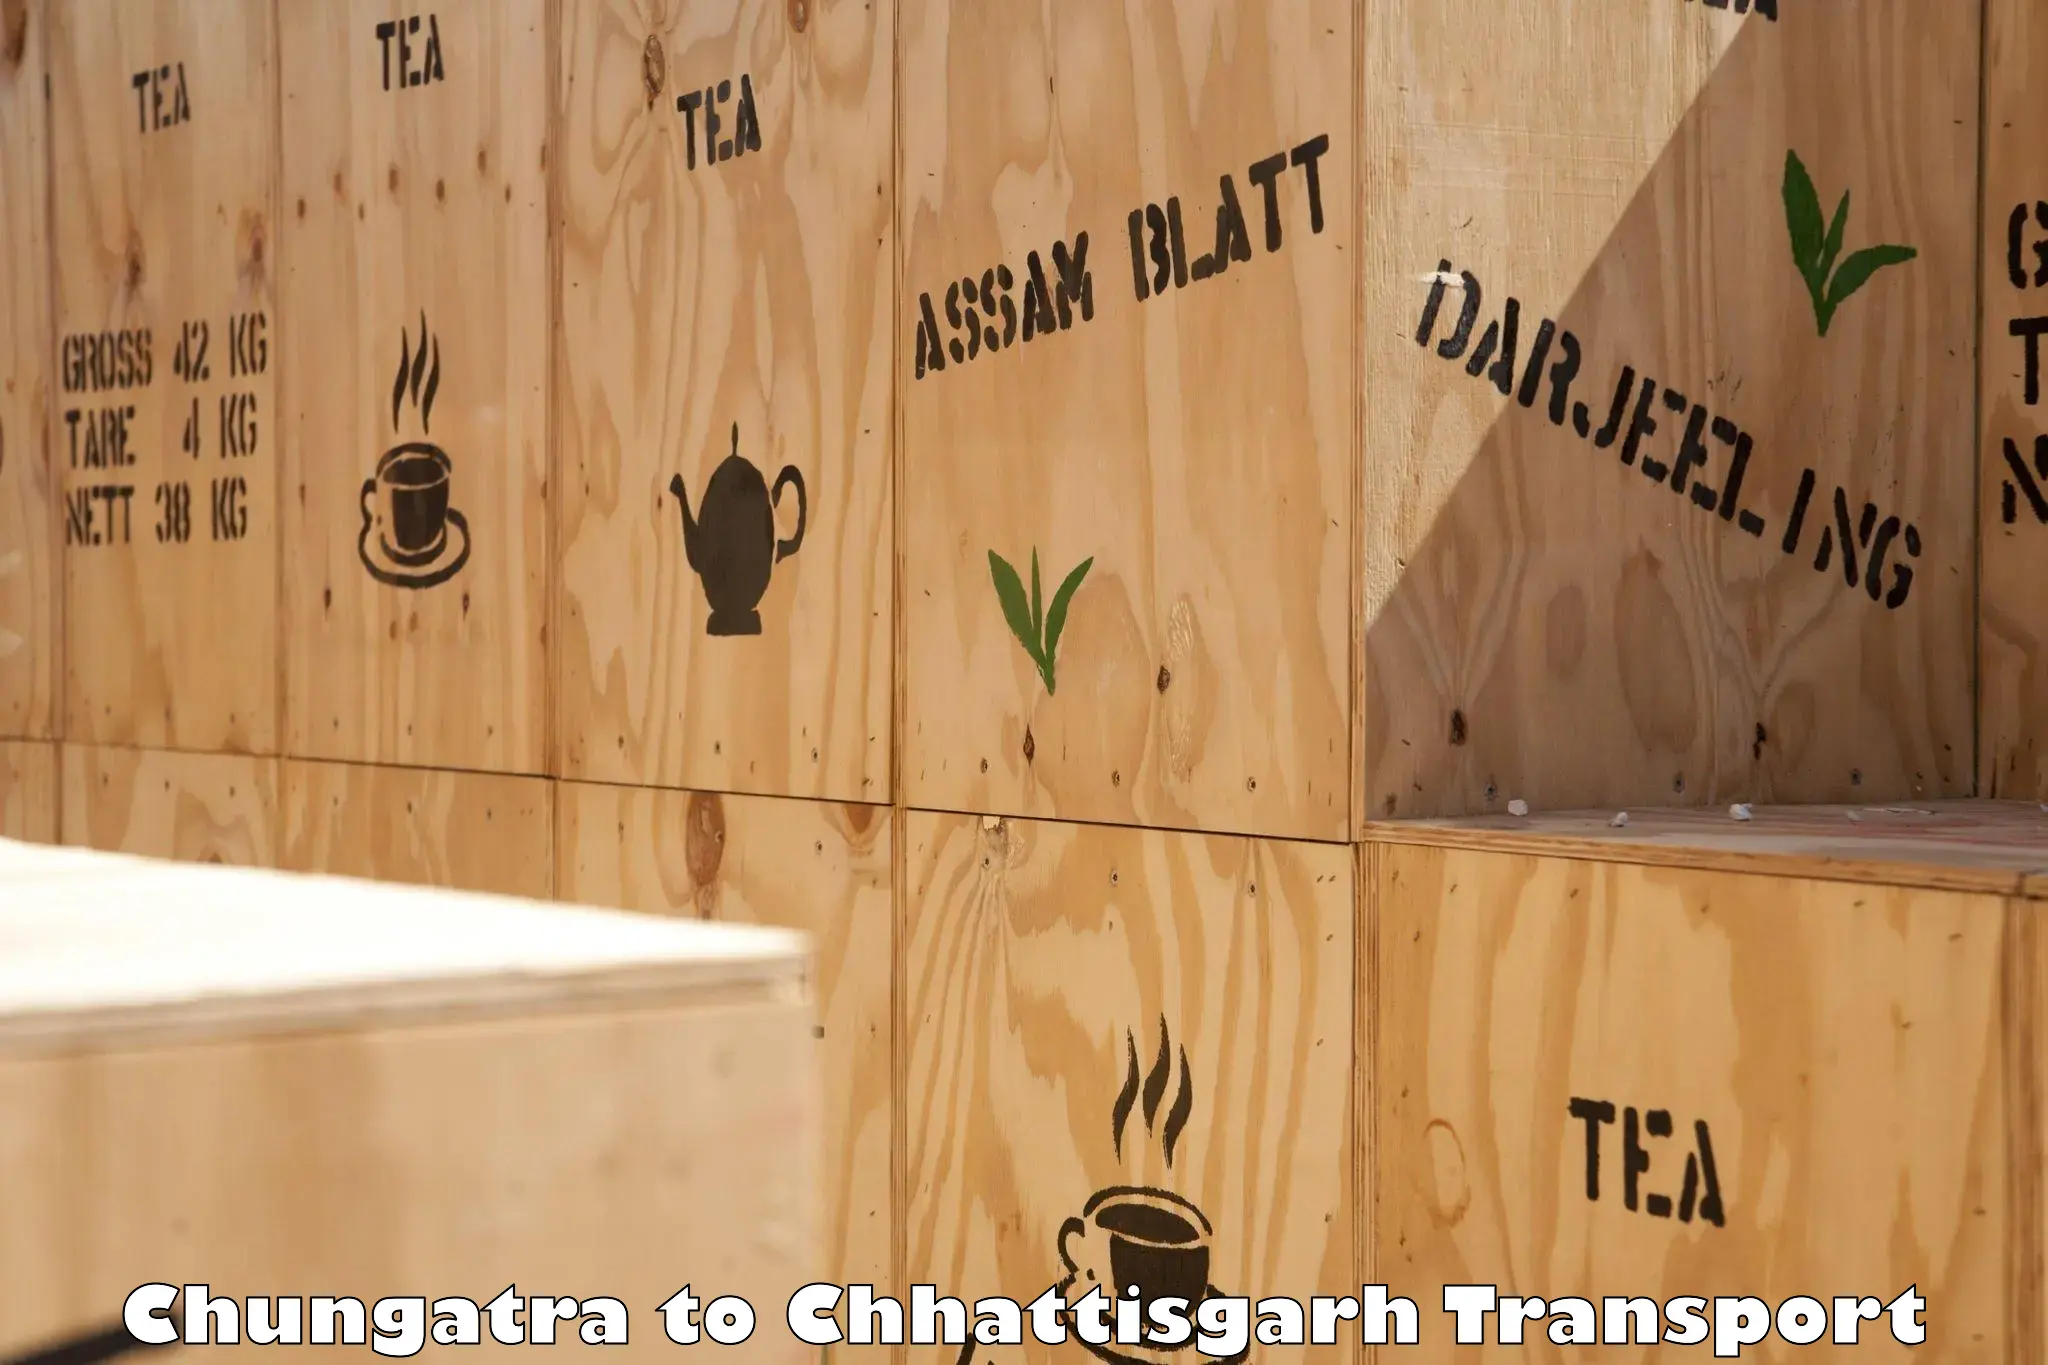 Interstate transport services Chungatra to bagbahra